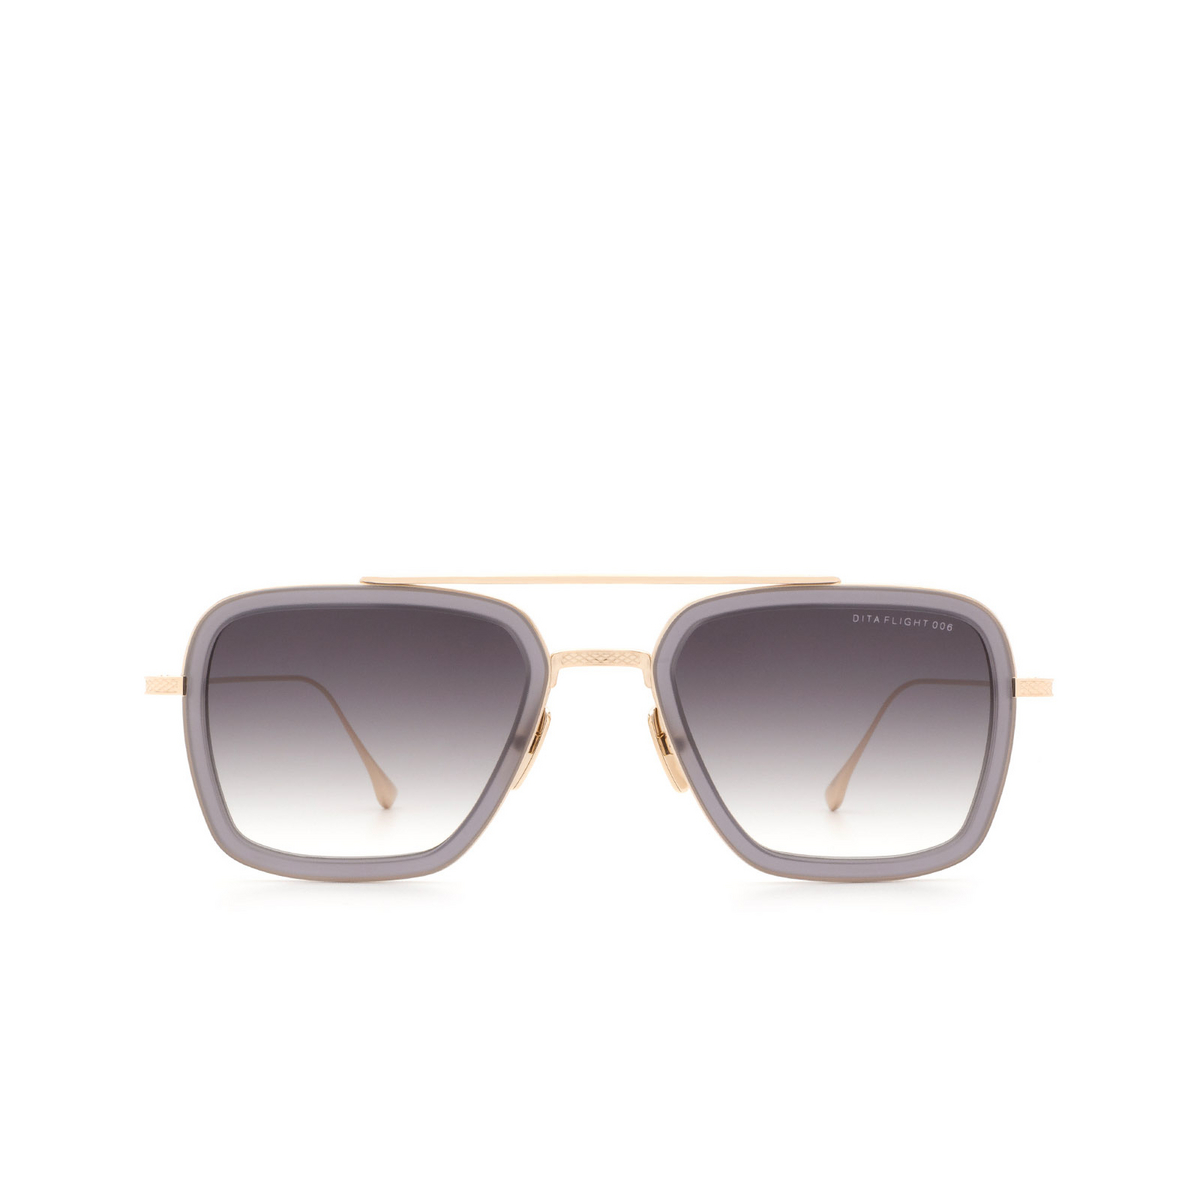 Dita® Aviator Sunglasses: Flight.006 7806-H color Grey Gold Gry-gld - front view.